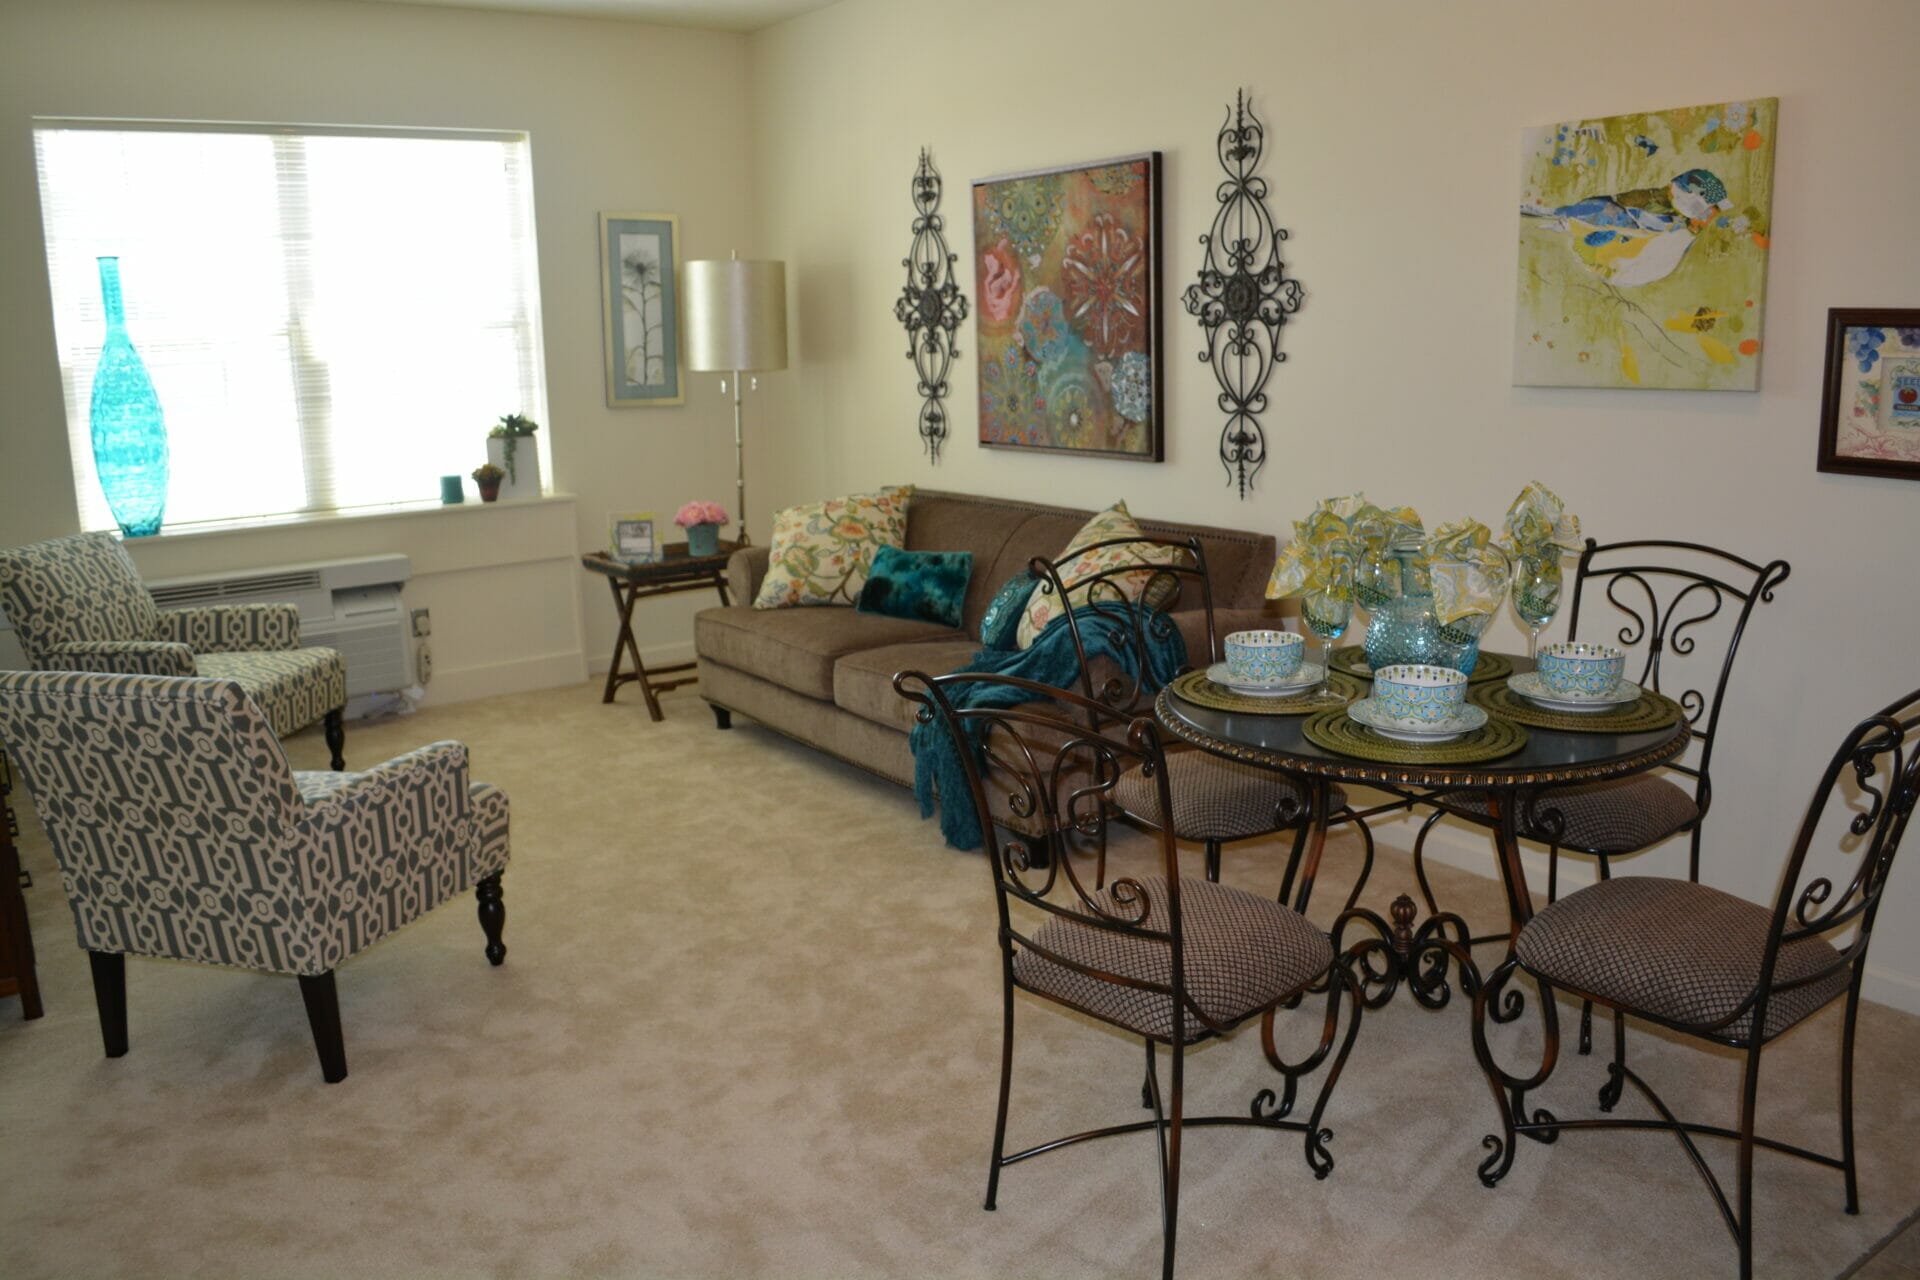 <span  class="uc_style_uc_tiles_grid_image_elementor_uc_items_attribute_title" style="color:#000000;">Allisonville Meadows Assisted Living apartment living room.</span>